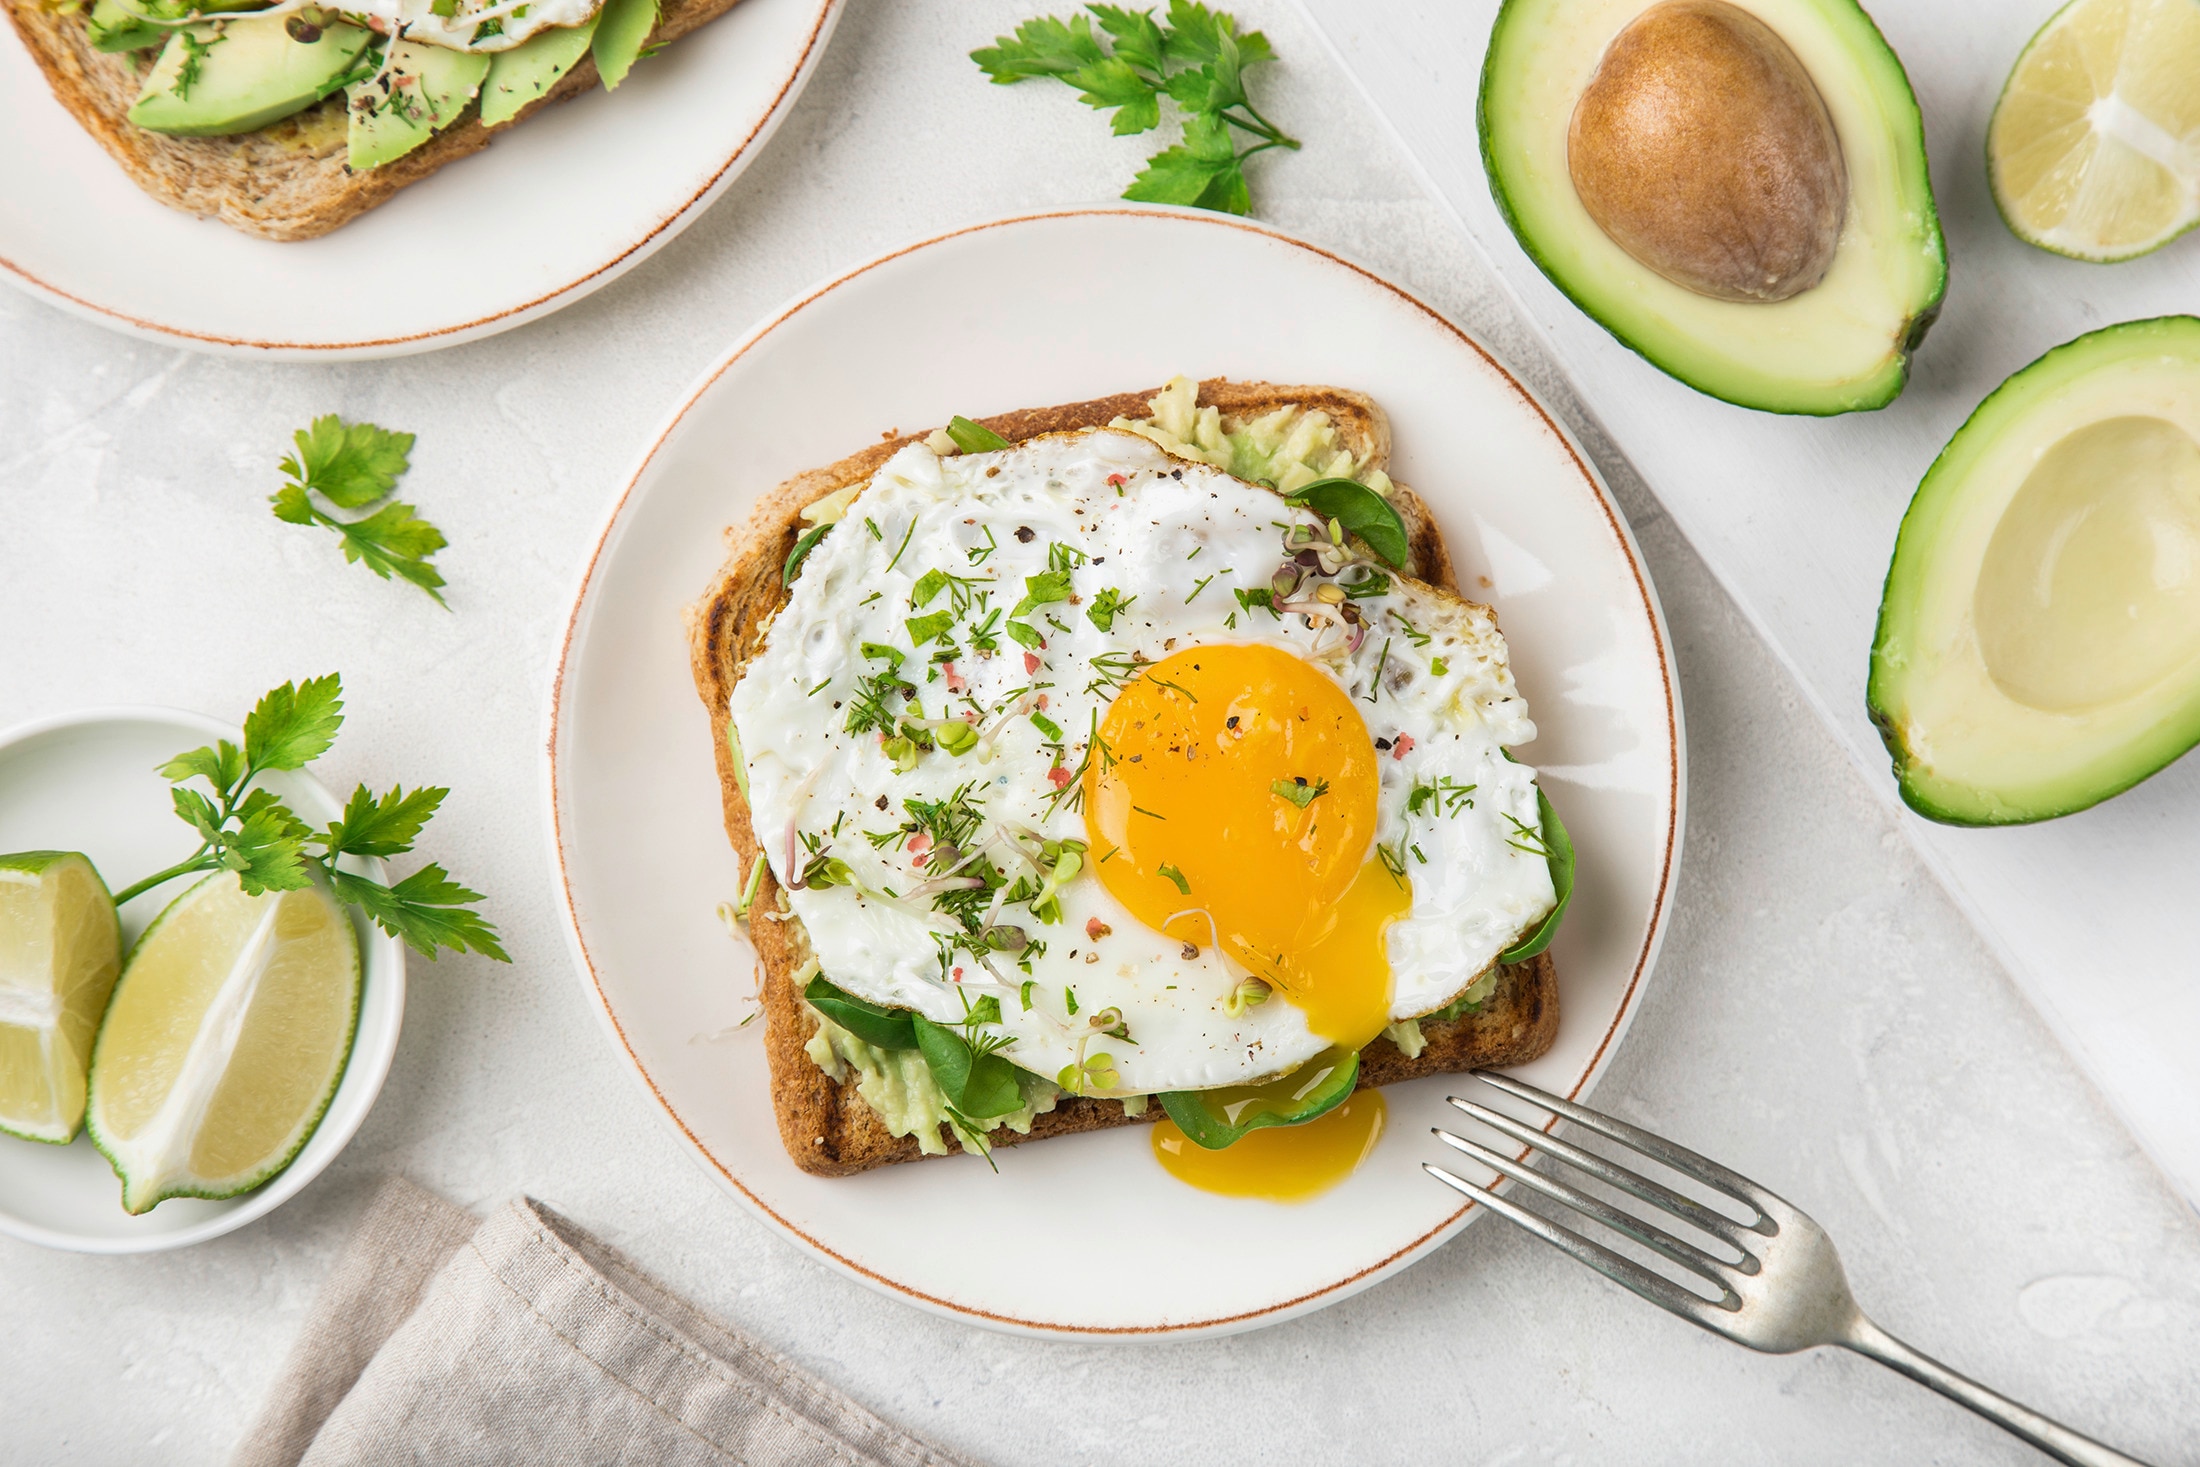 Avocado toast with greens, a fried egg, and herbs